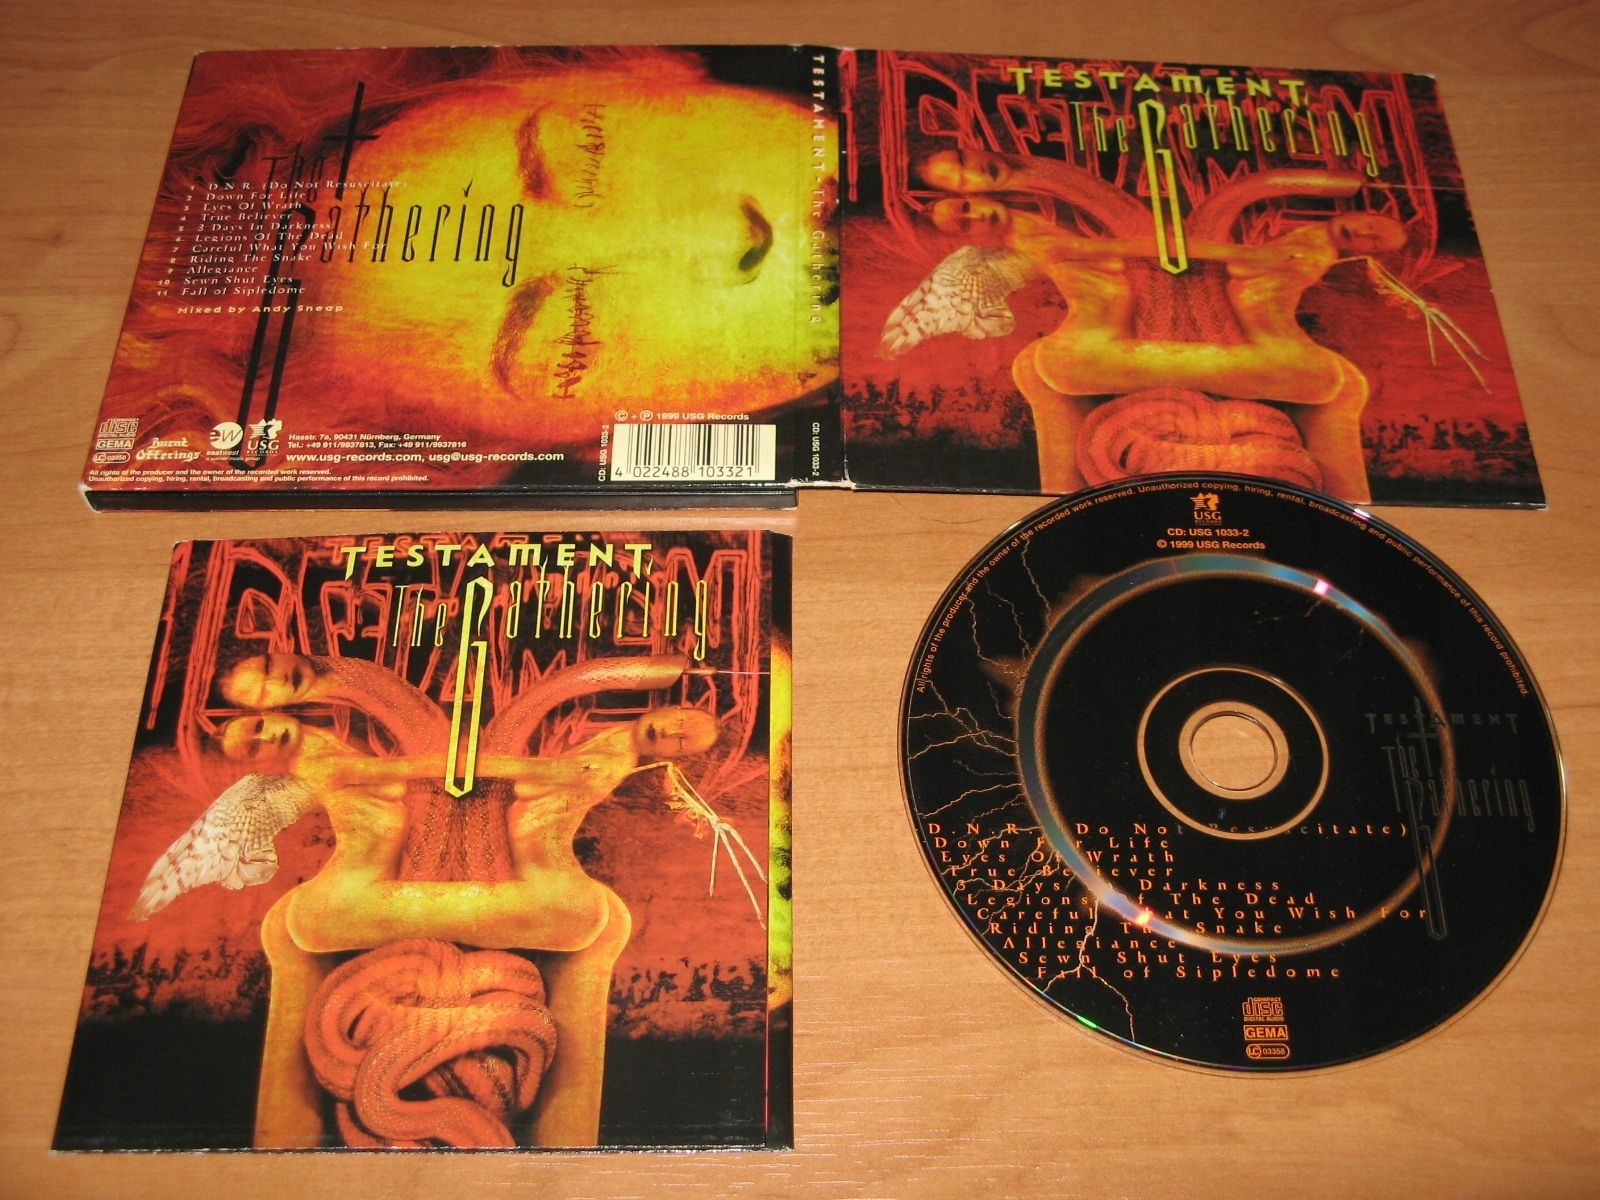 The gathering cd